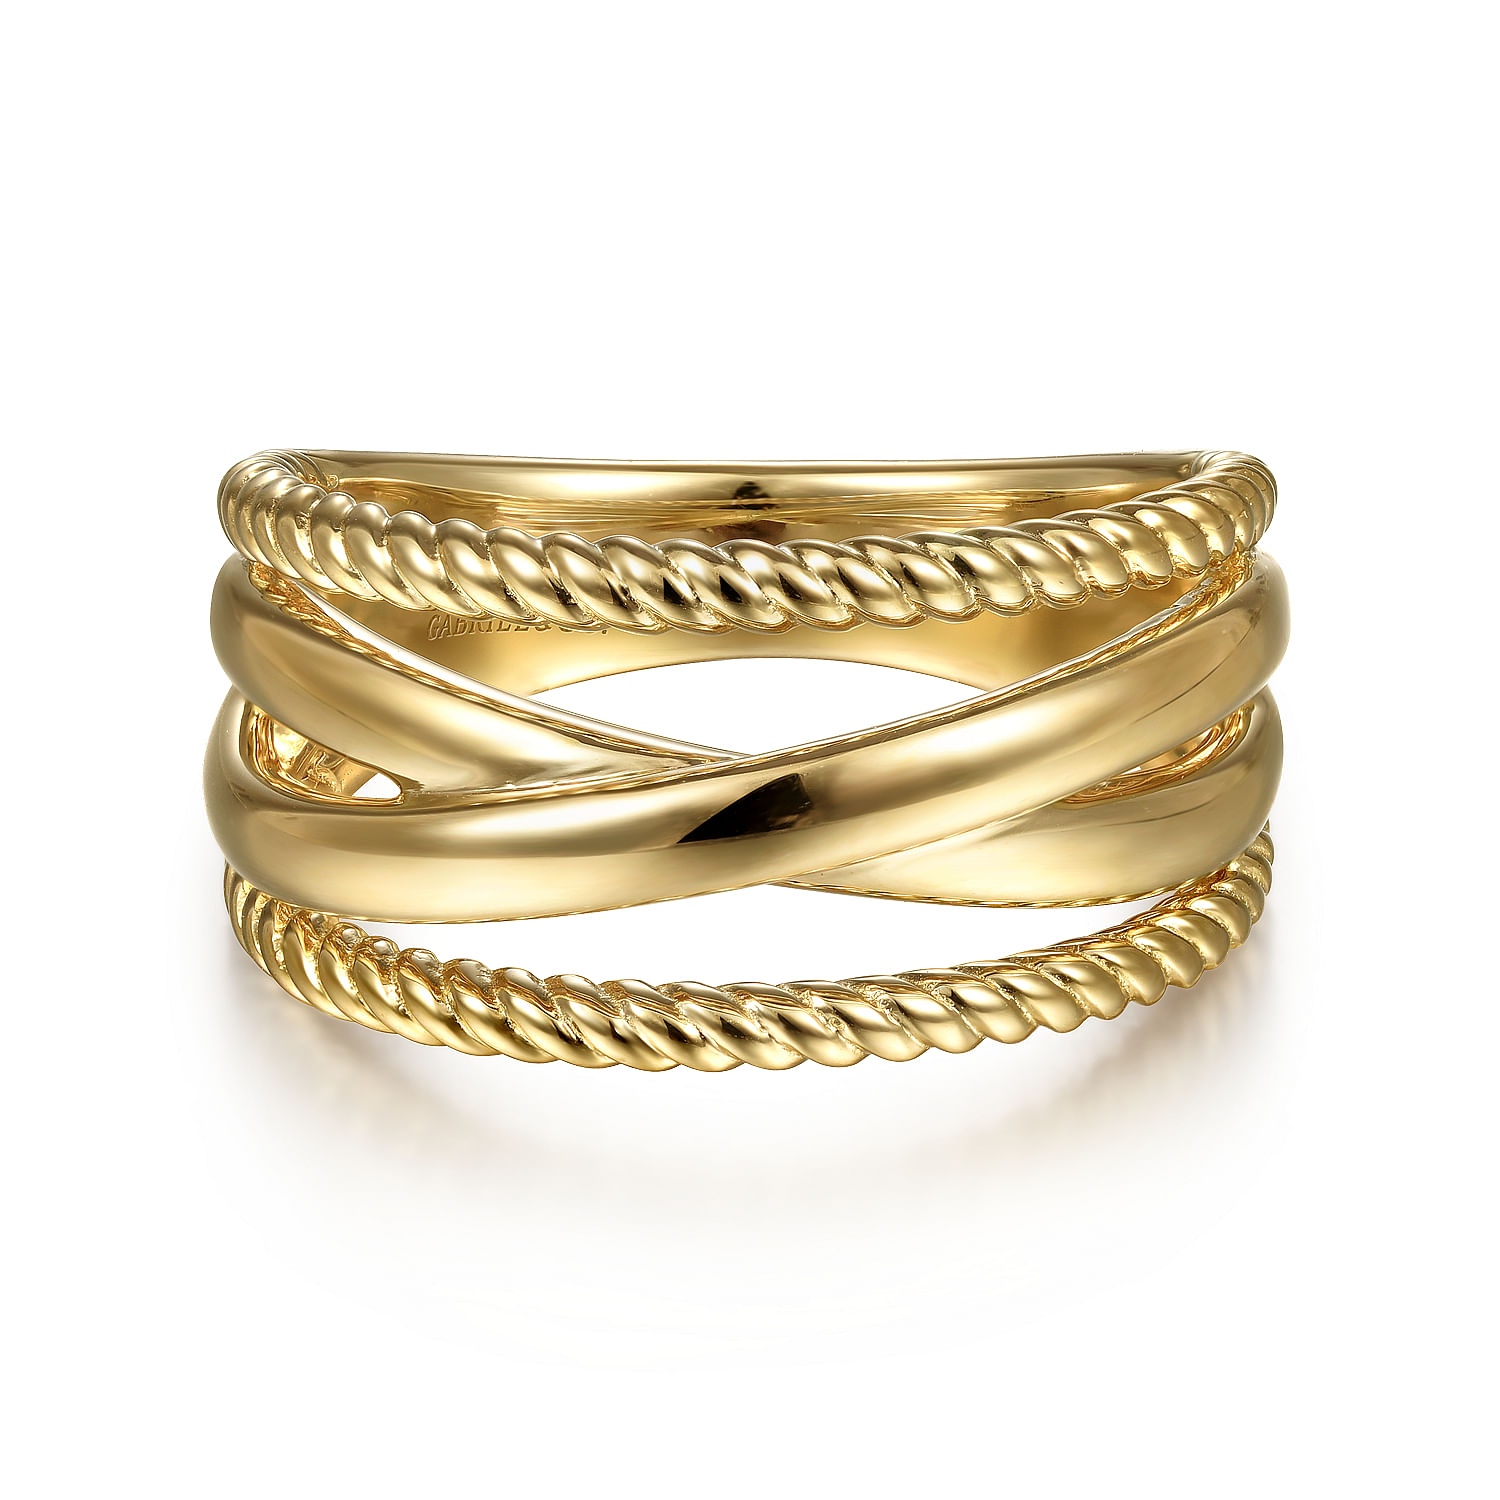 14K Yellow Gold Twisted and Plain Criss Cross Ring